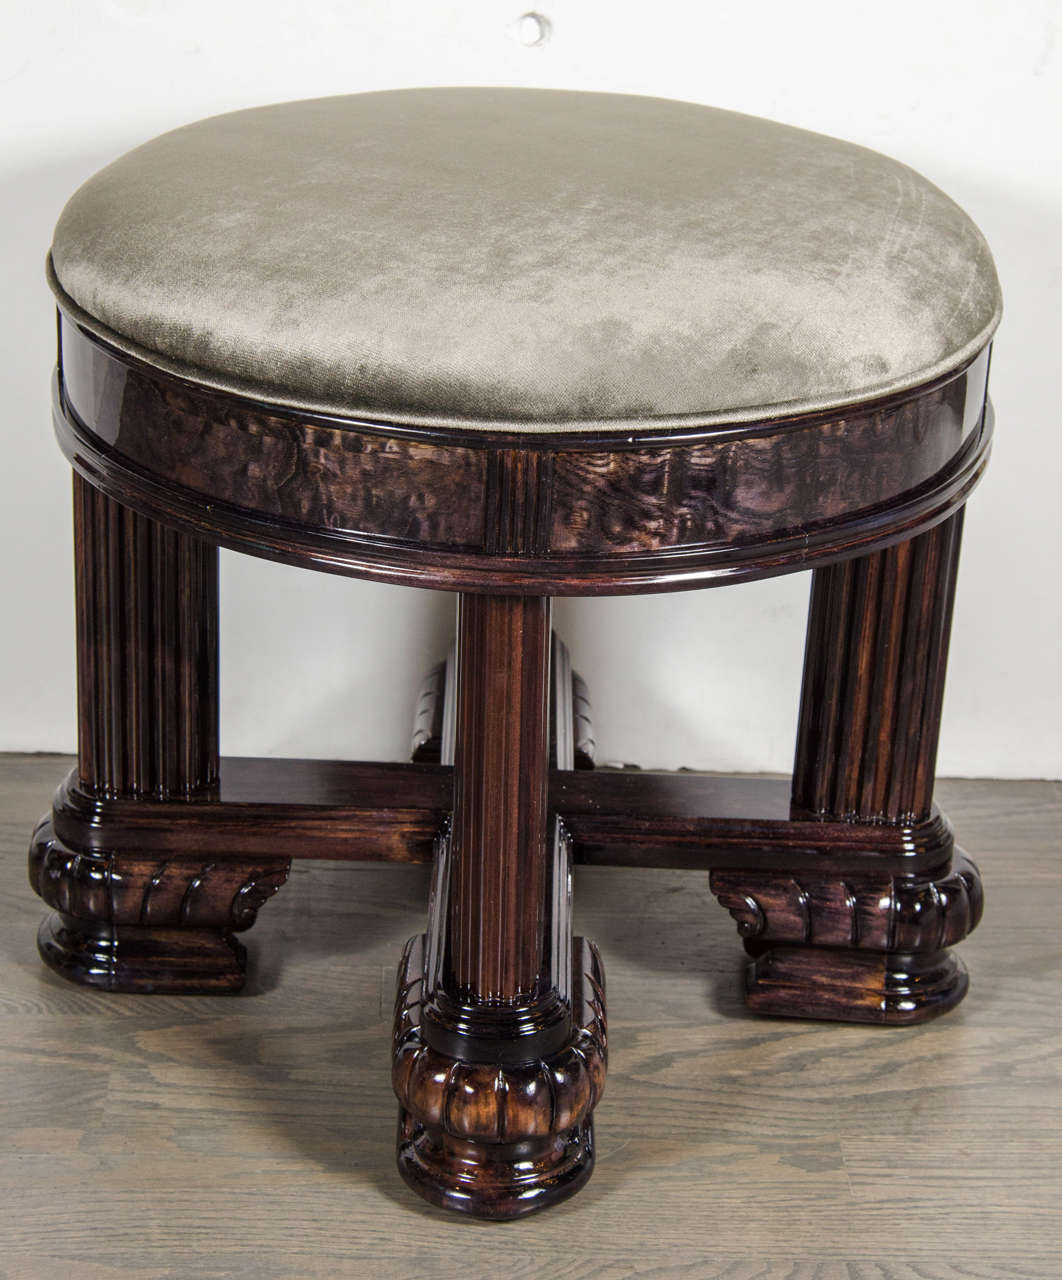 Art Deco stool in the style of Ruhlmann with X-form base and ribbed, column like legs that descend from its thick banding in ebonized Maple with fluted detailing.  The base of each ribbed, column like leg is capped with a stylized and intricate